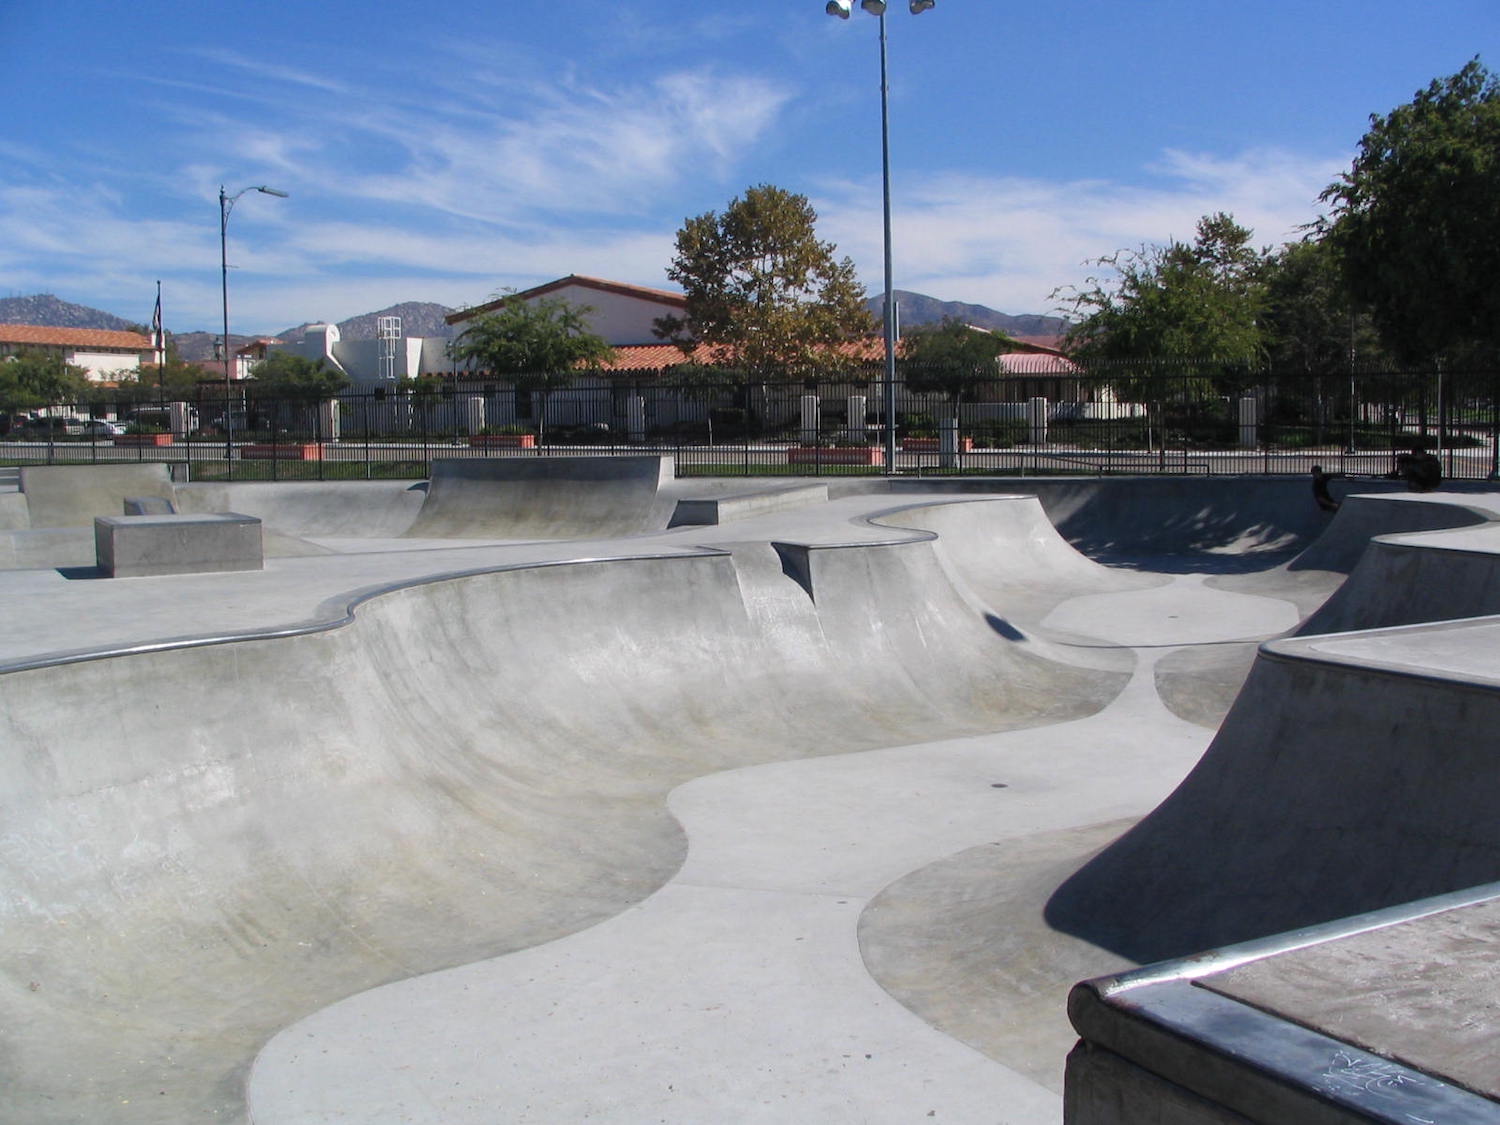 Poway Skate Park in San Diego featuring an empty bowl and half-pipe